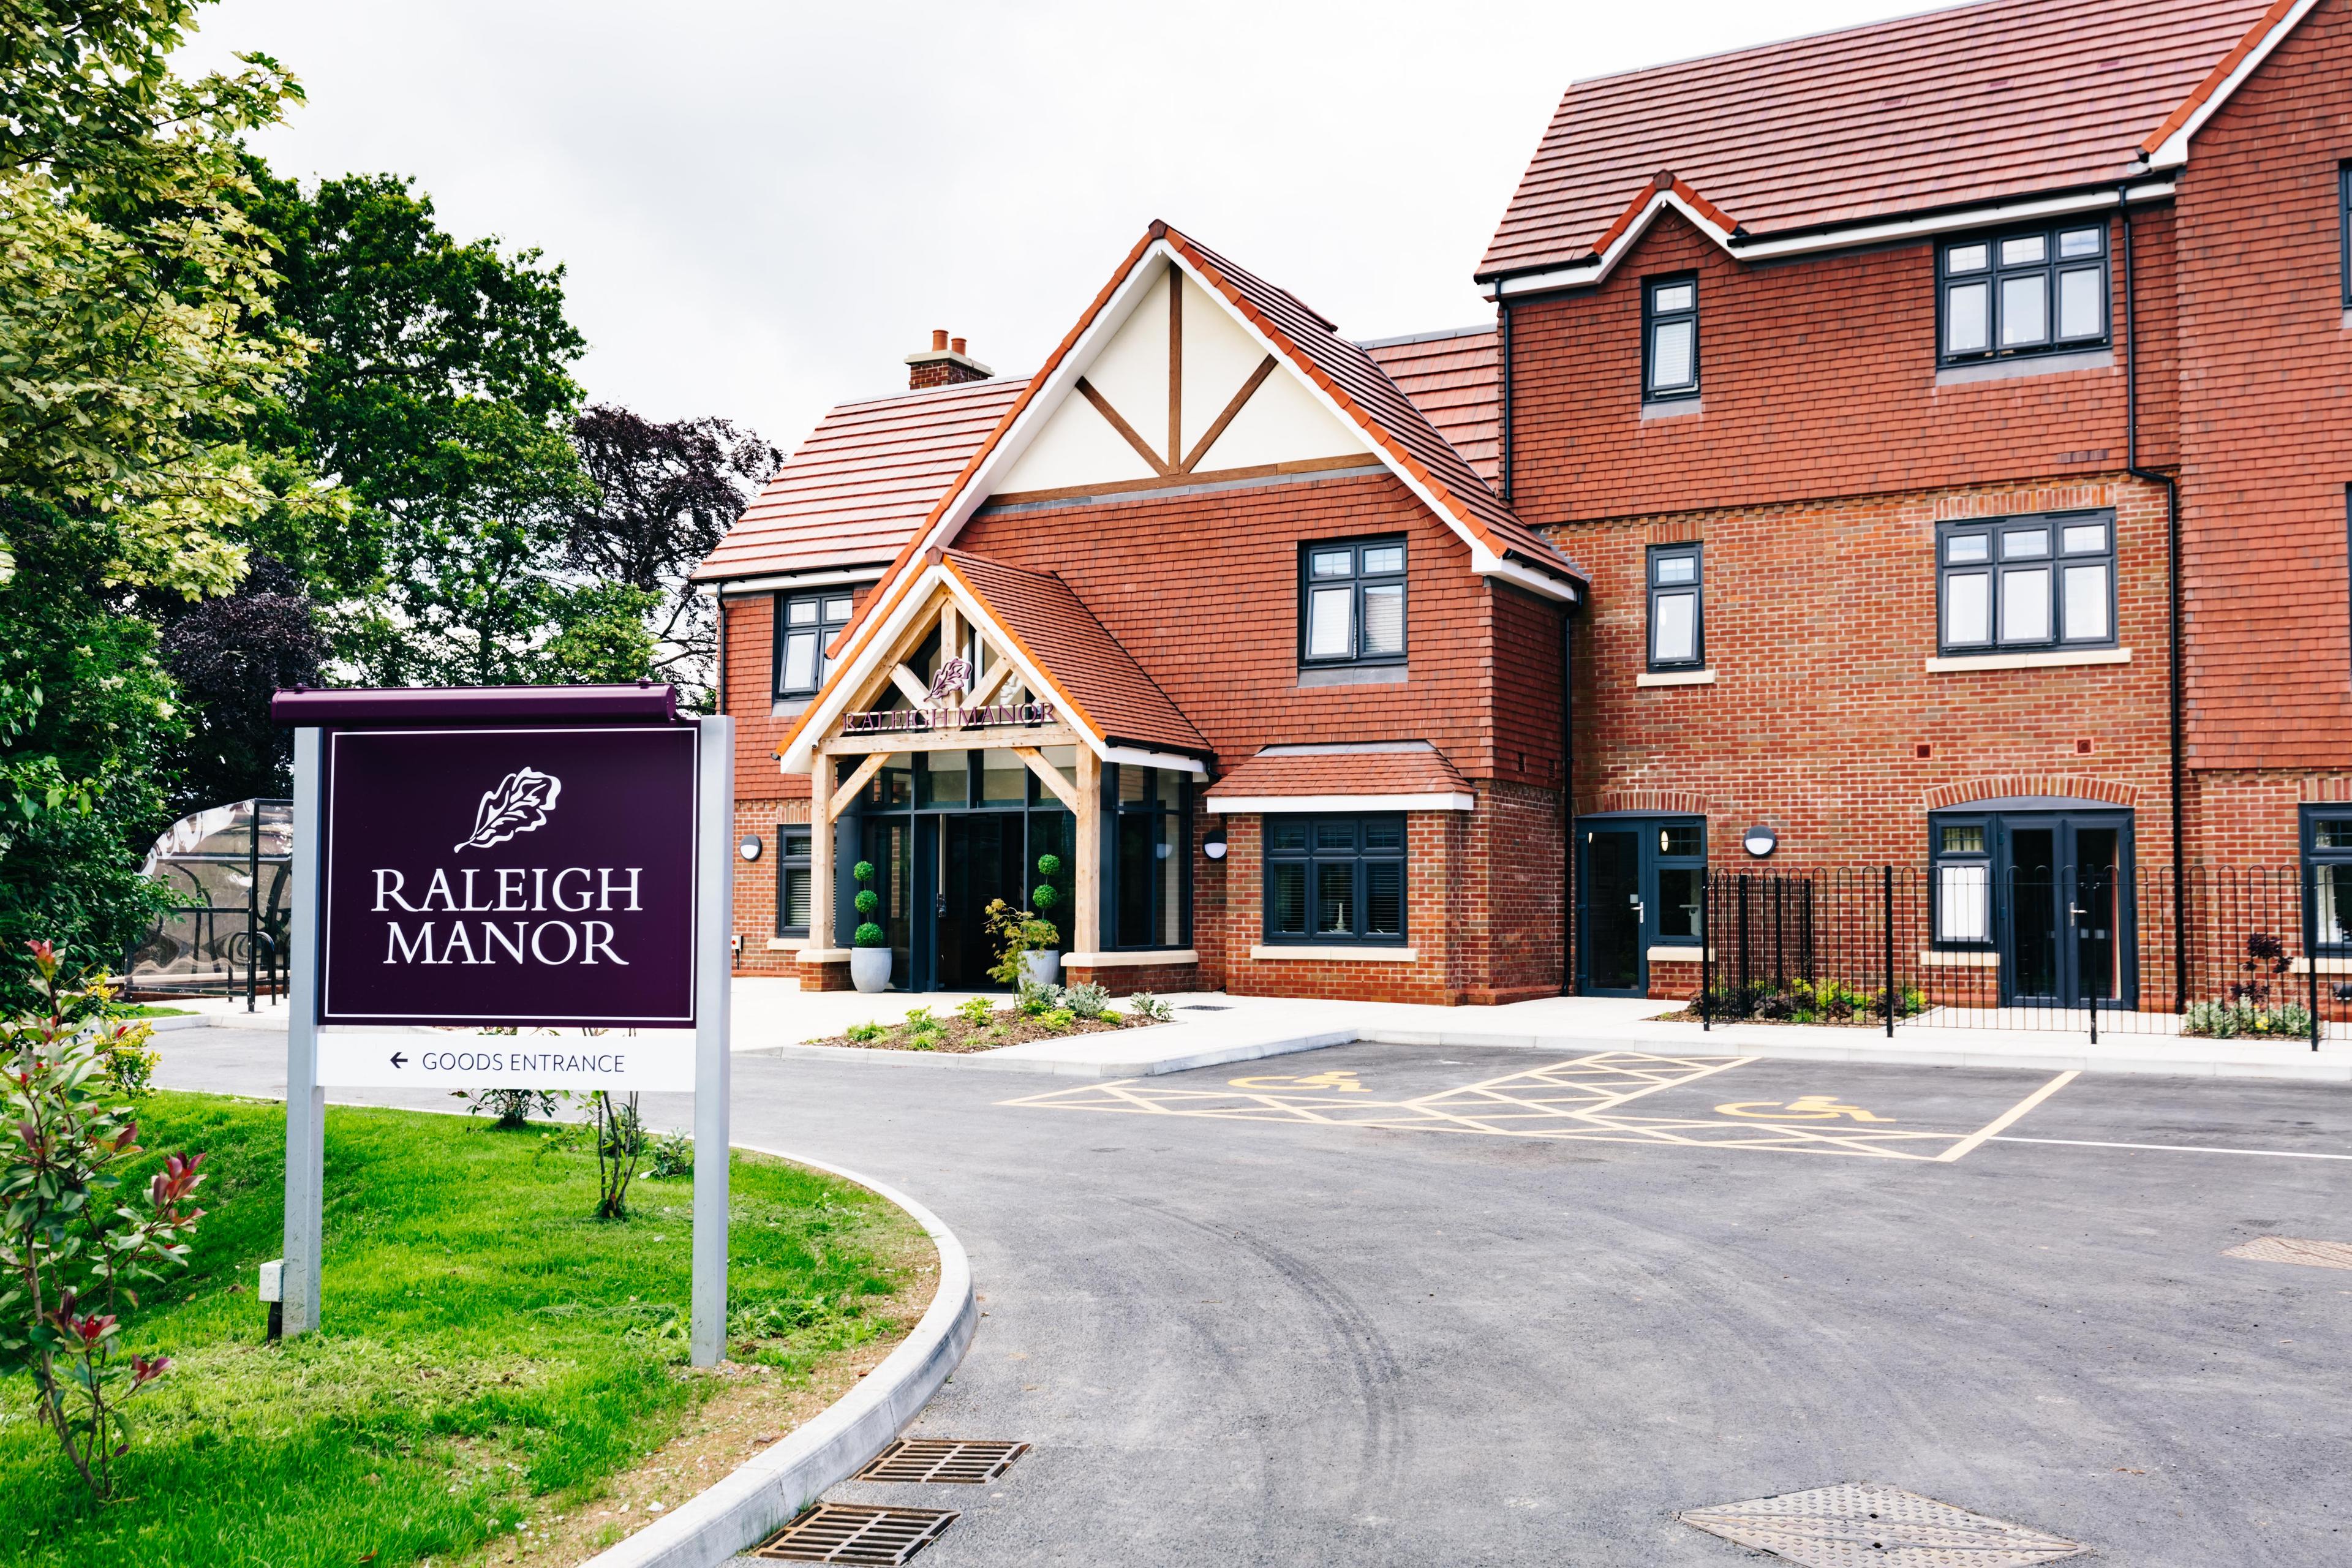 Raleigh Manor Care Home